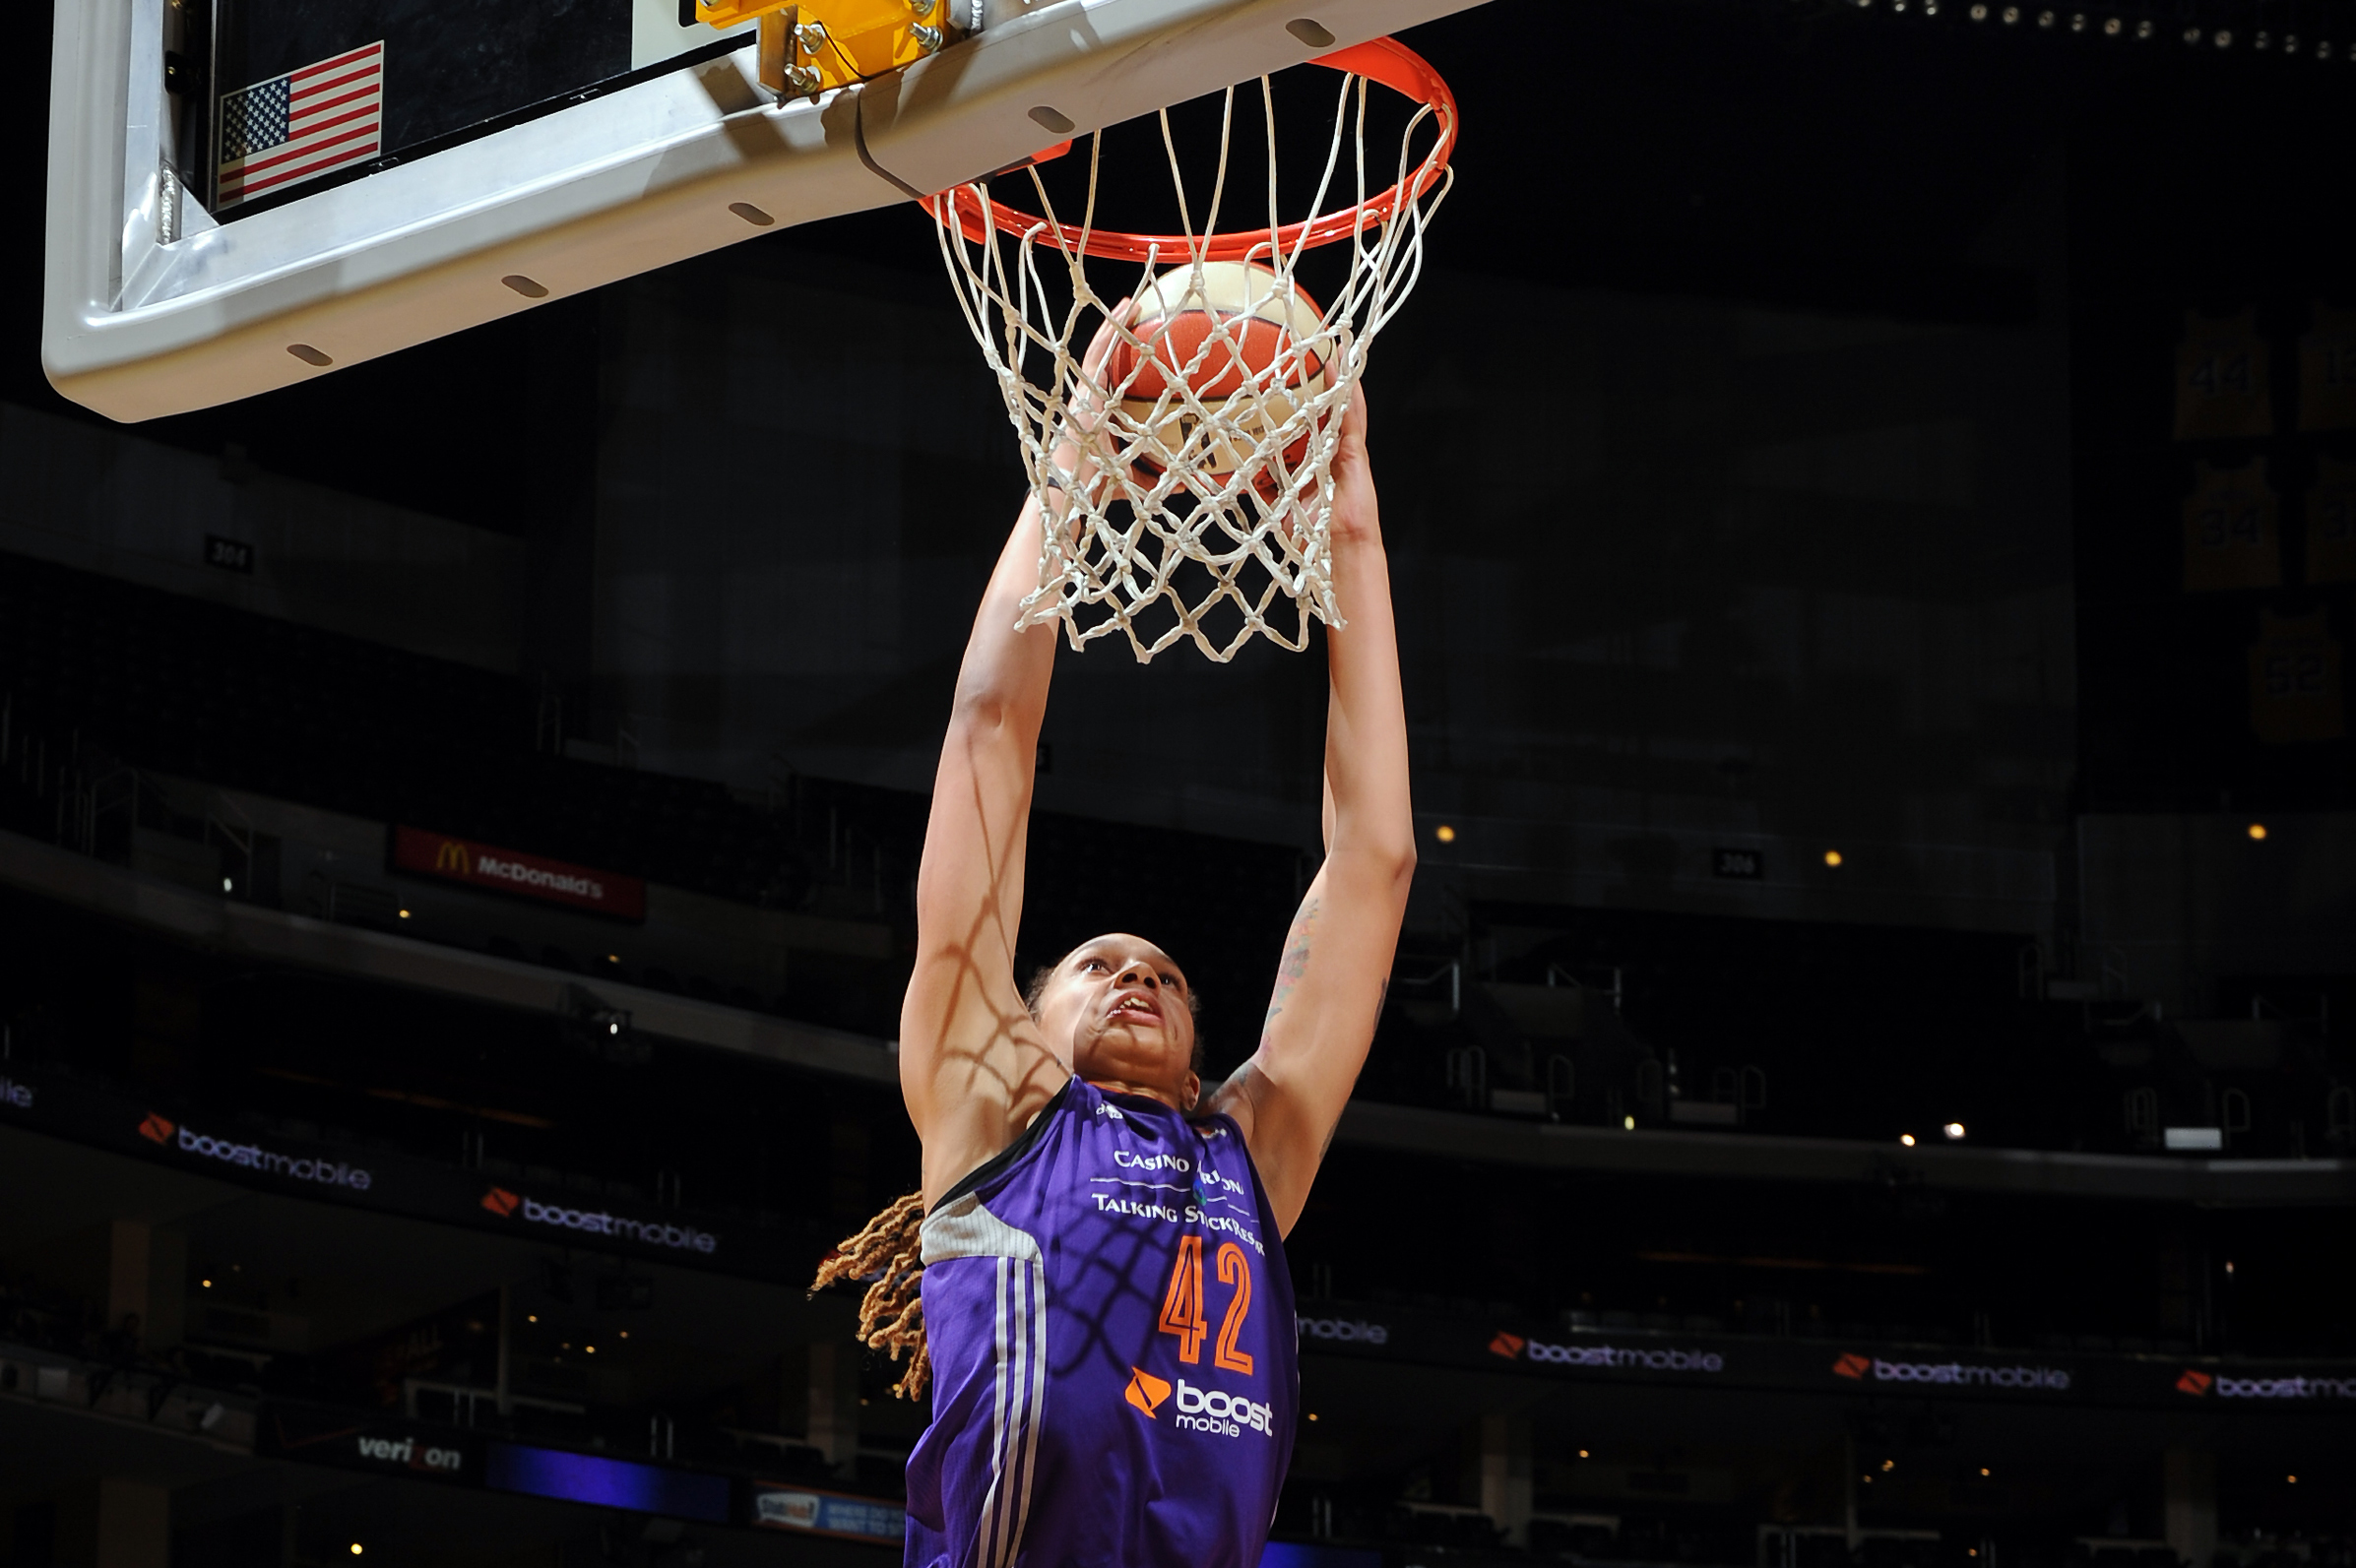 File:Griner dunking at 2015 All-Star game.jpg - Wikipedia